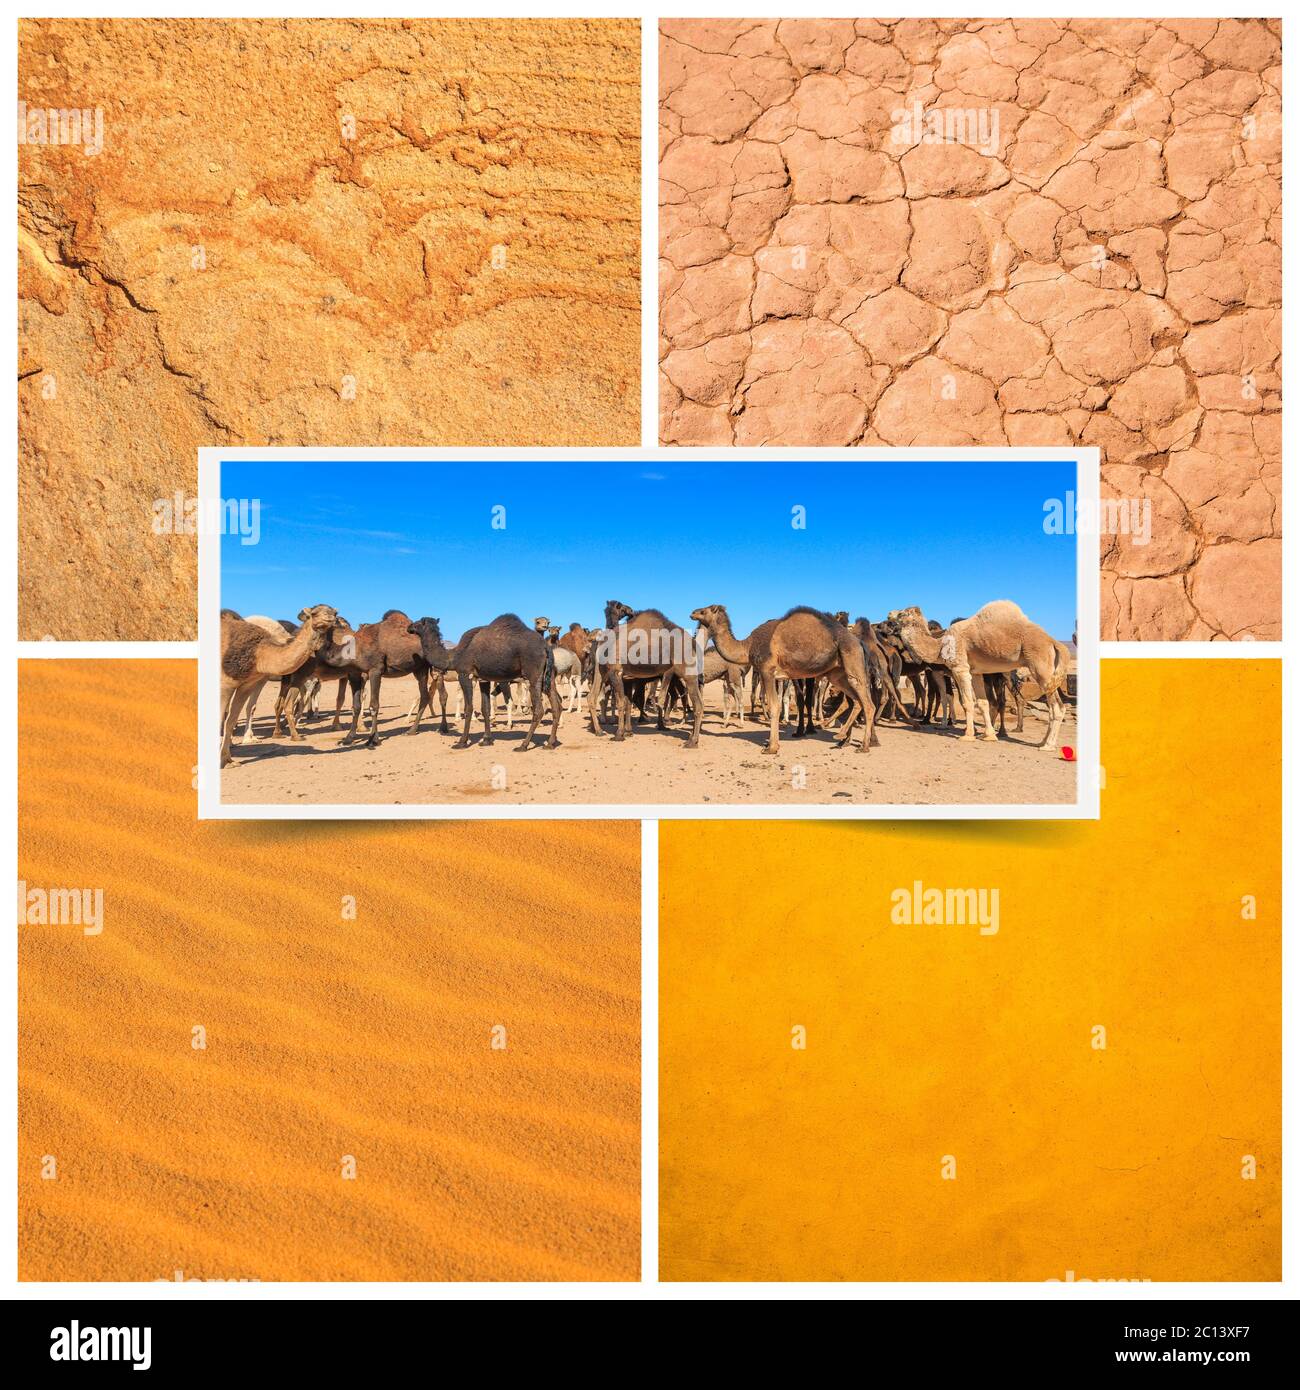 Composition showing details of the Moroccan desert Stock Photo